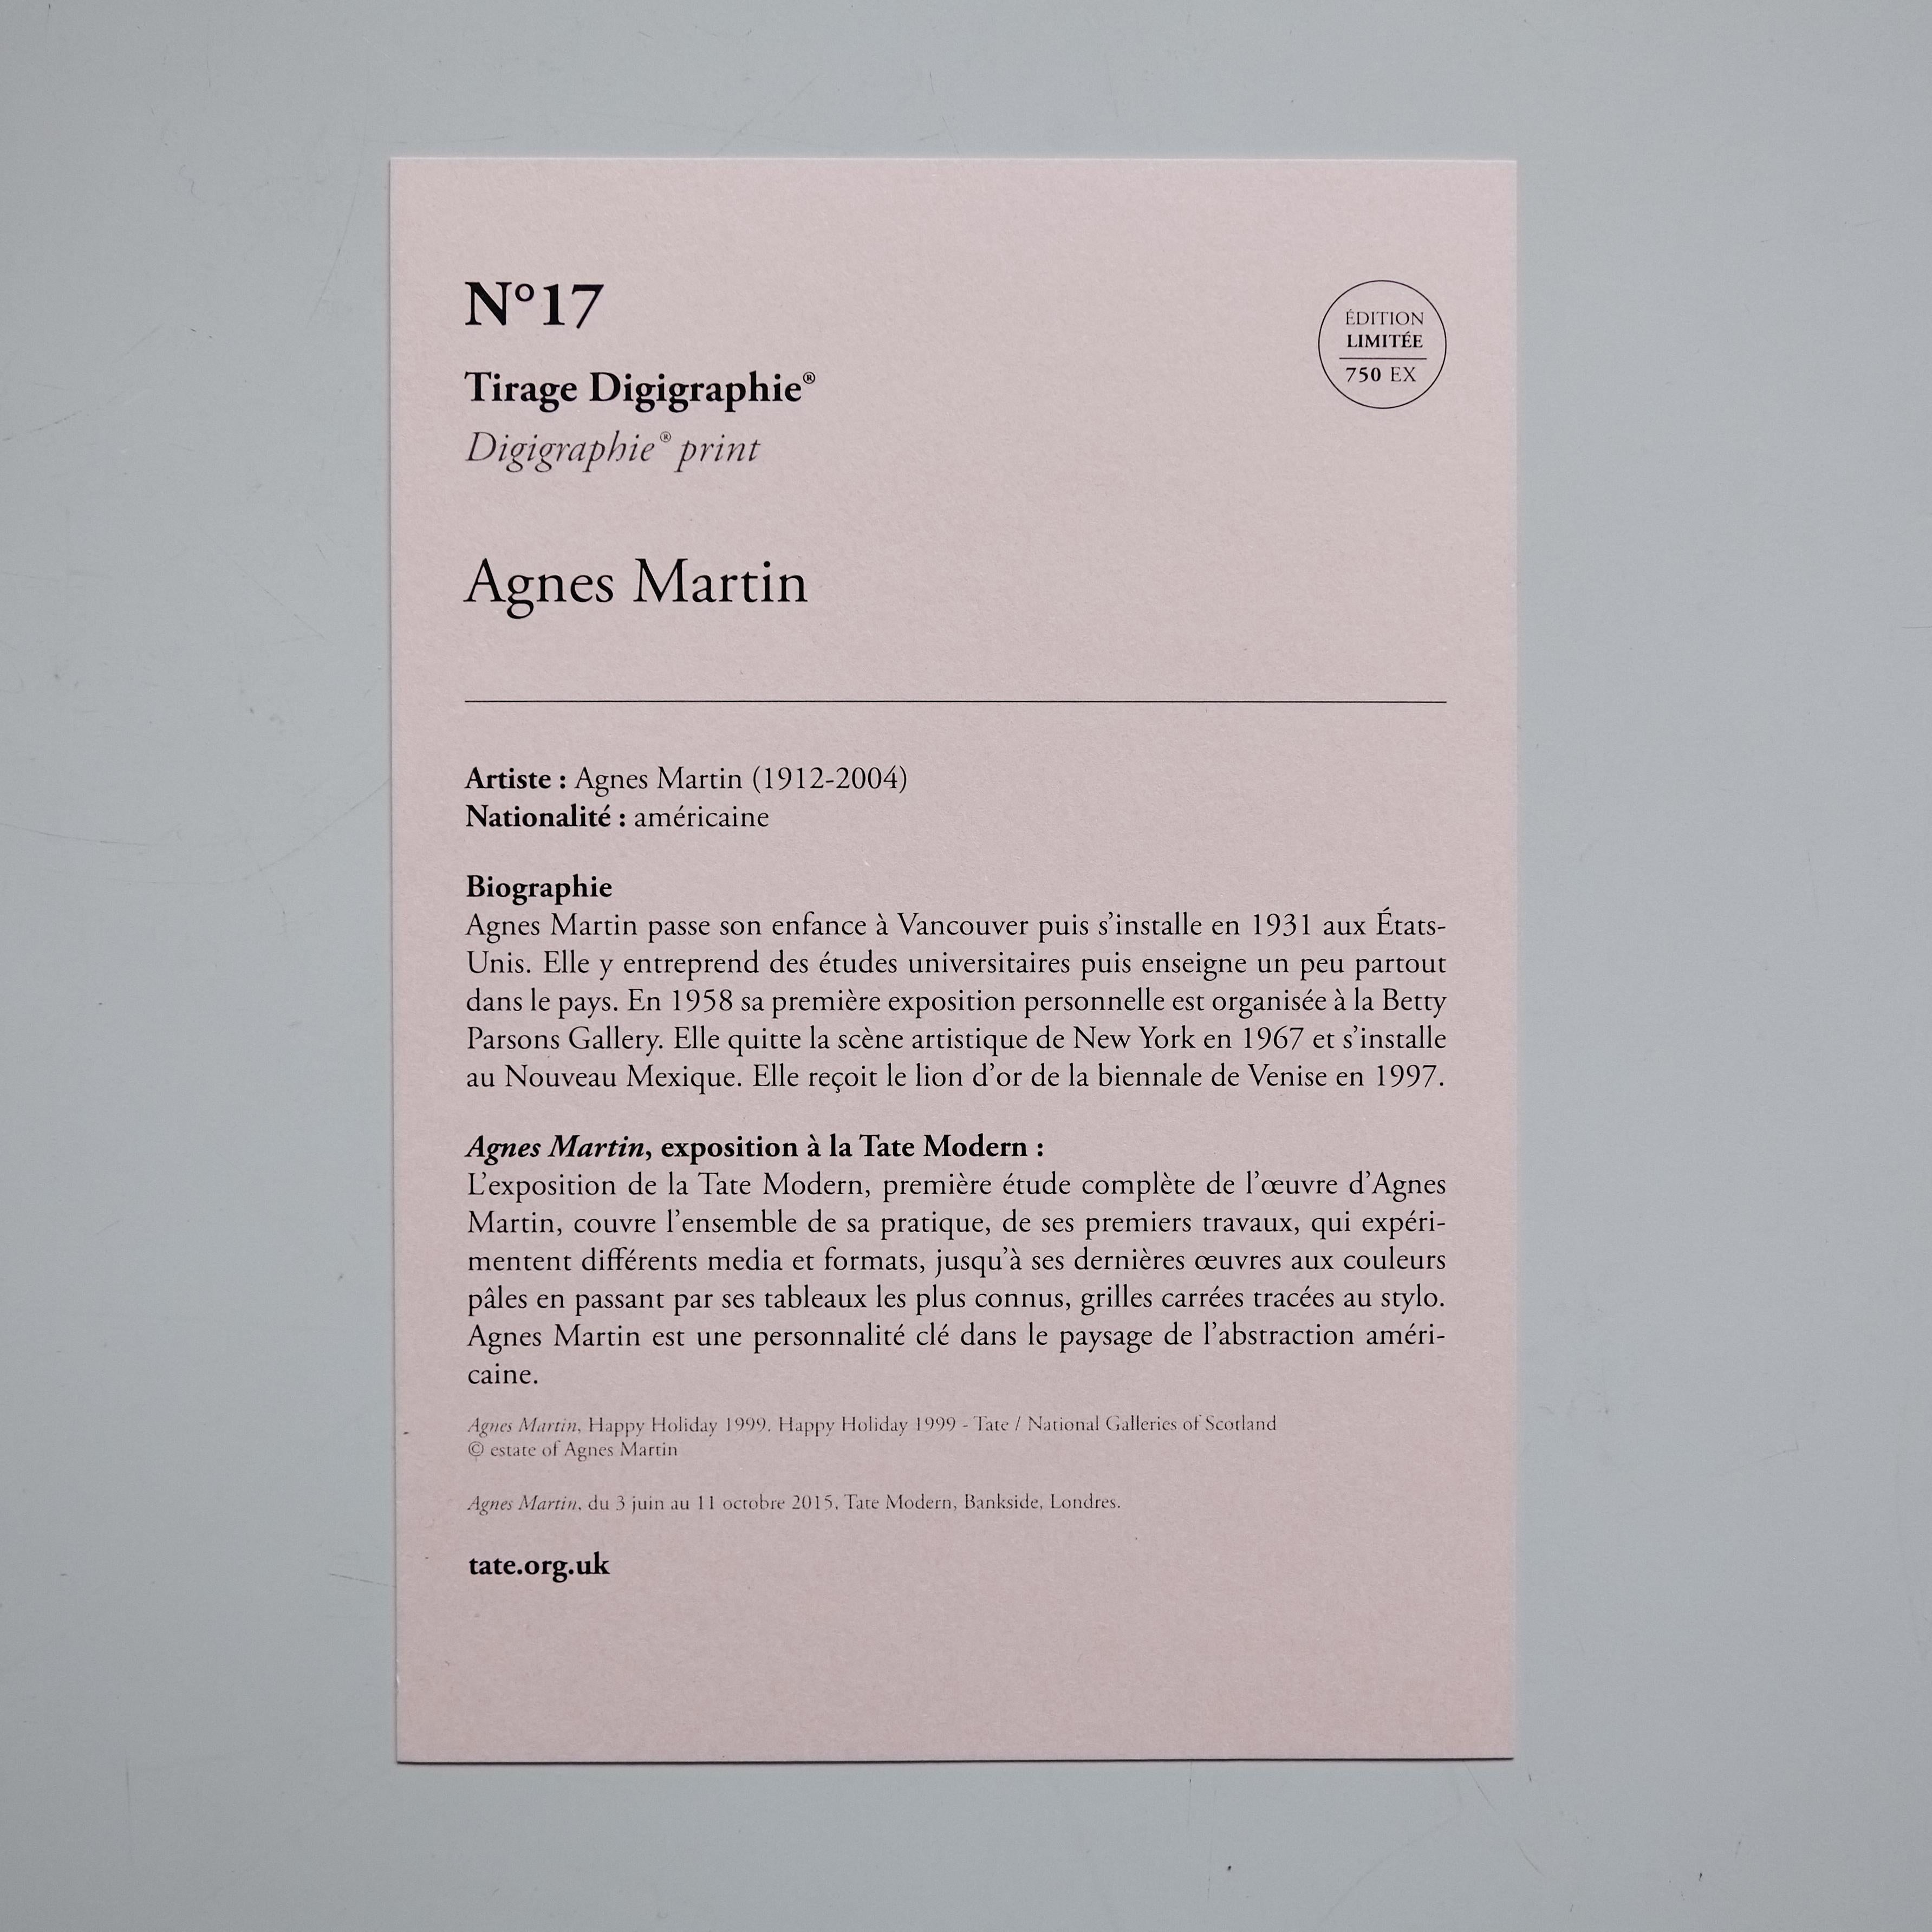 Paper Agnes Martin 'Happy Holiday' Digigraphie Nº17 Limited Edition, in, 2015